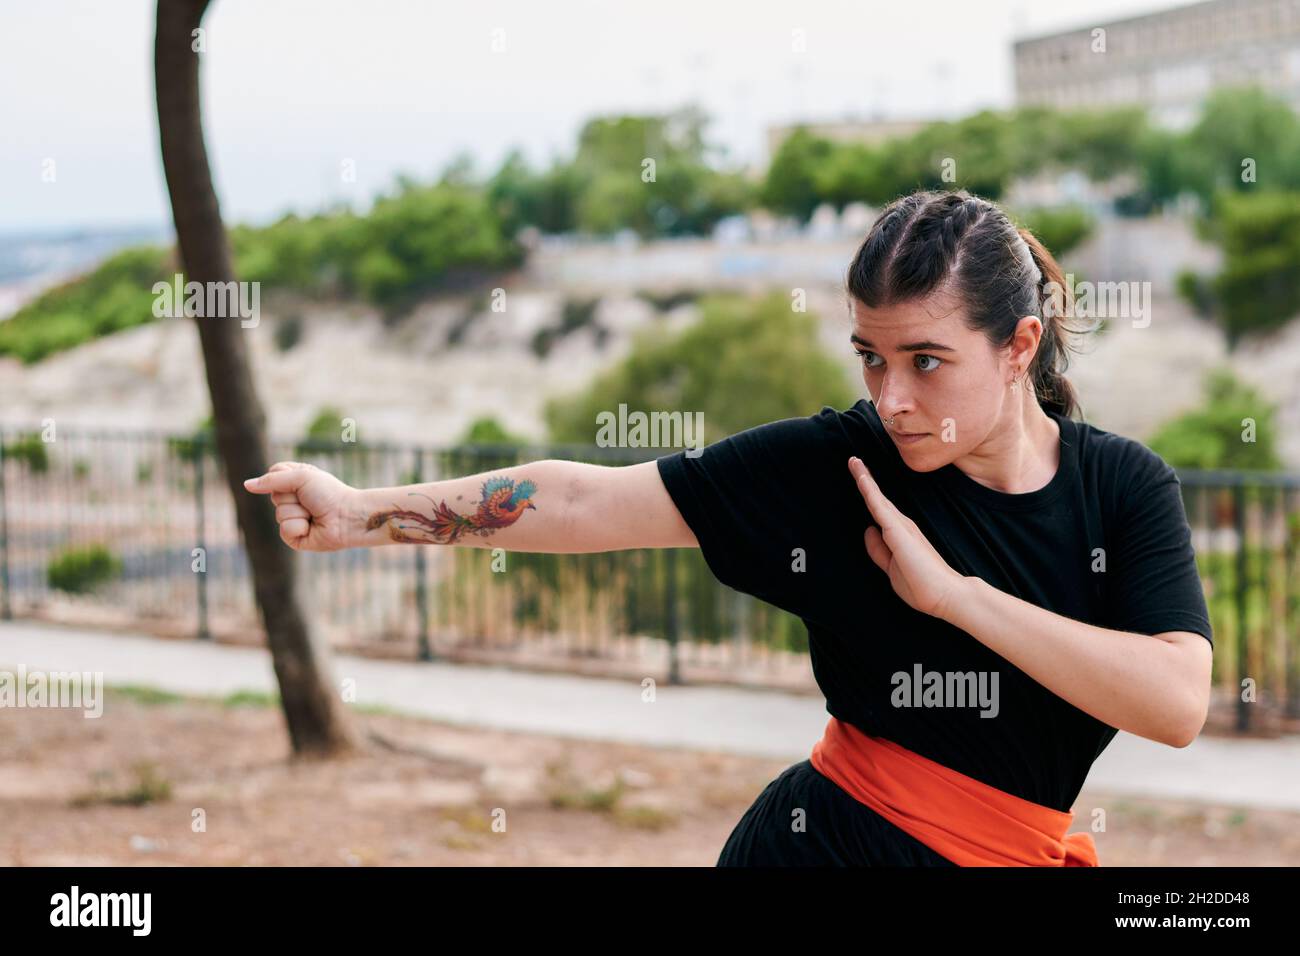 Woman with a tattoo training martial arts in a park Stock Photo